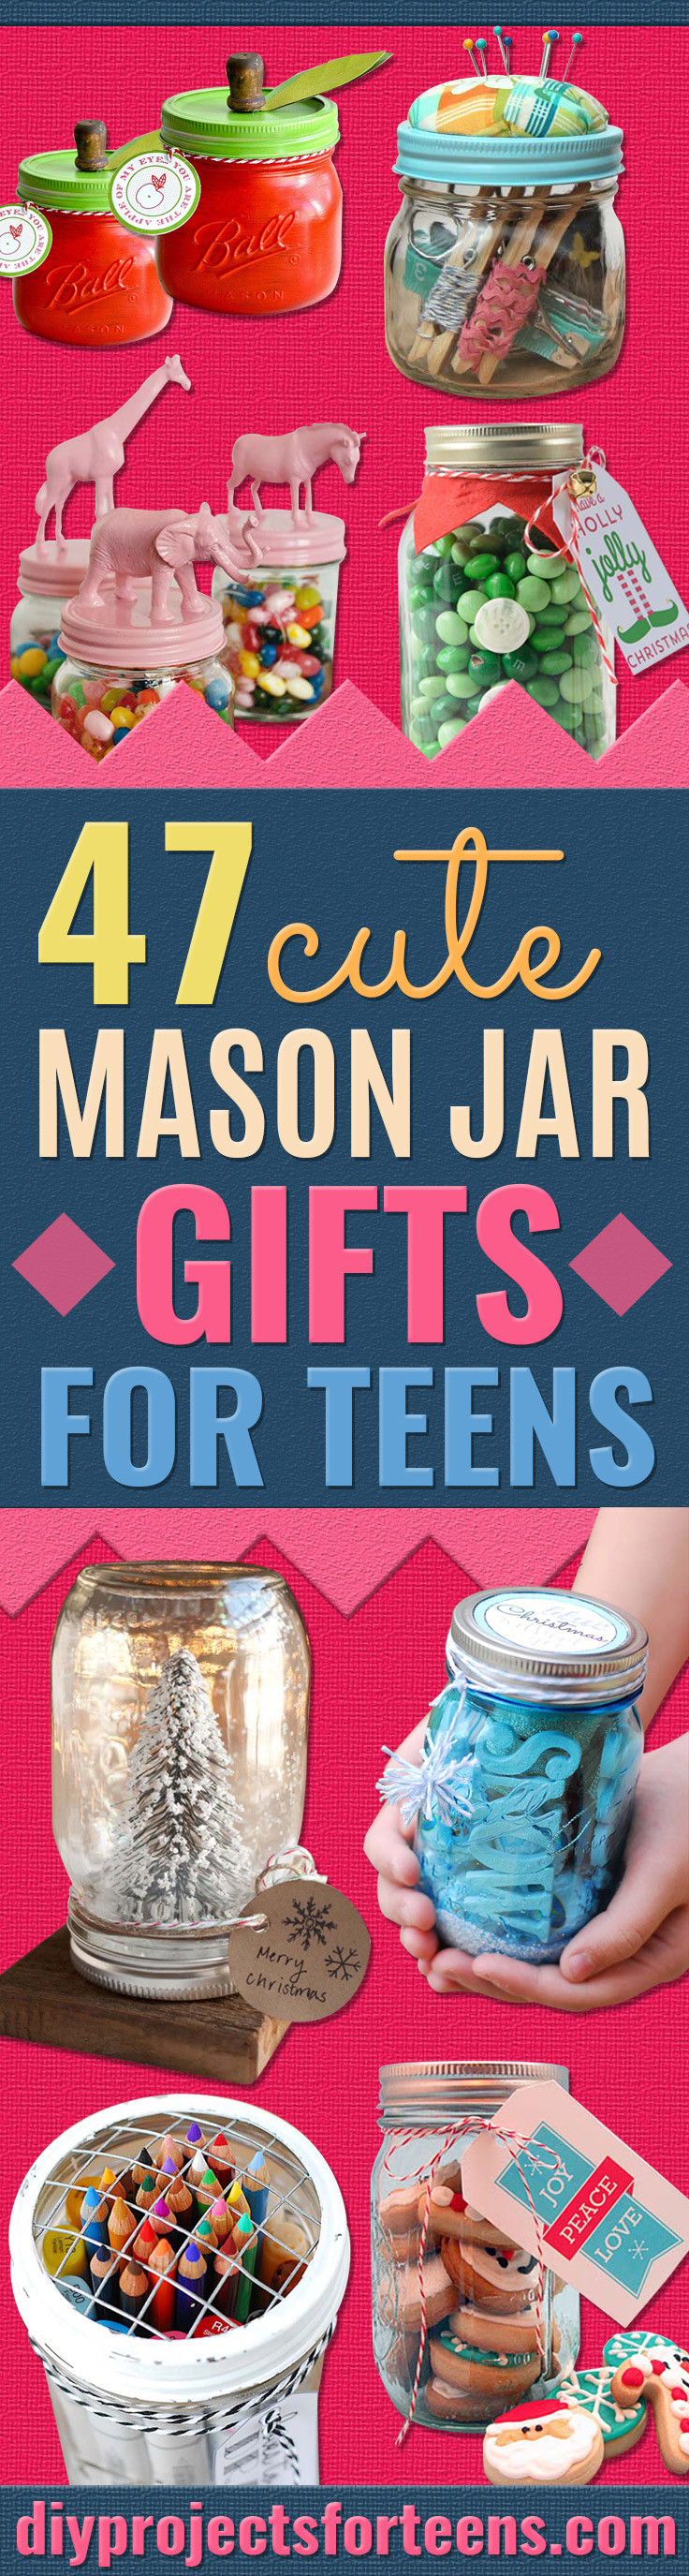 DIY Christmas Gifts For Teenagers
 47 Cute Mason Jar Gifts for Teens